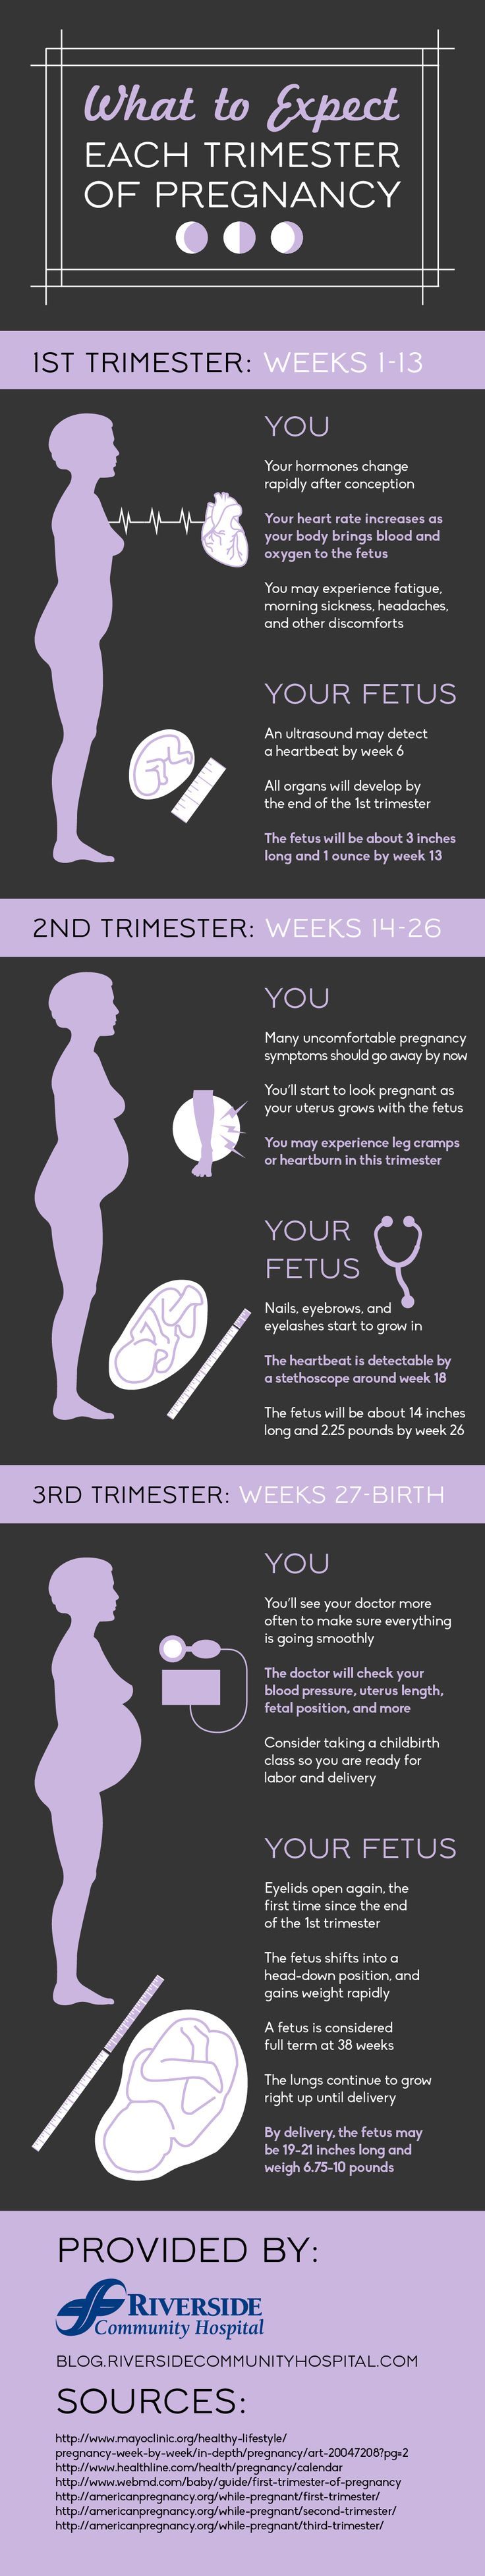 Early symptoms of pregnancy include headaches and morning sickness ...